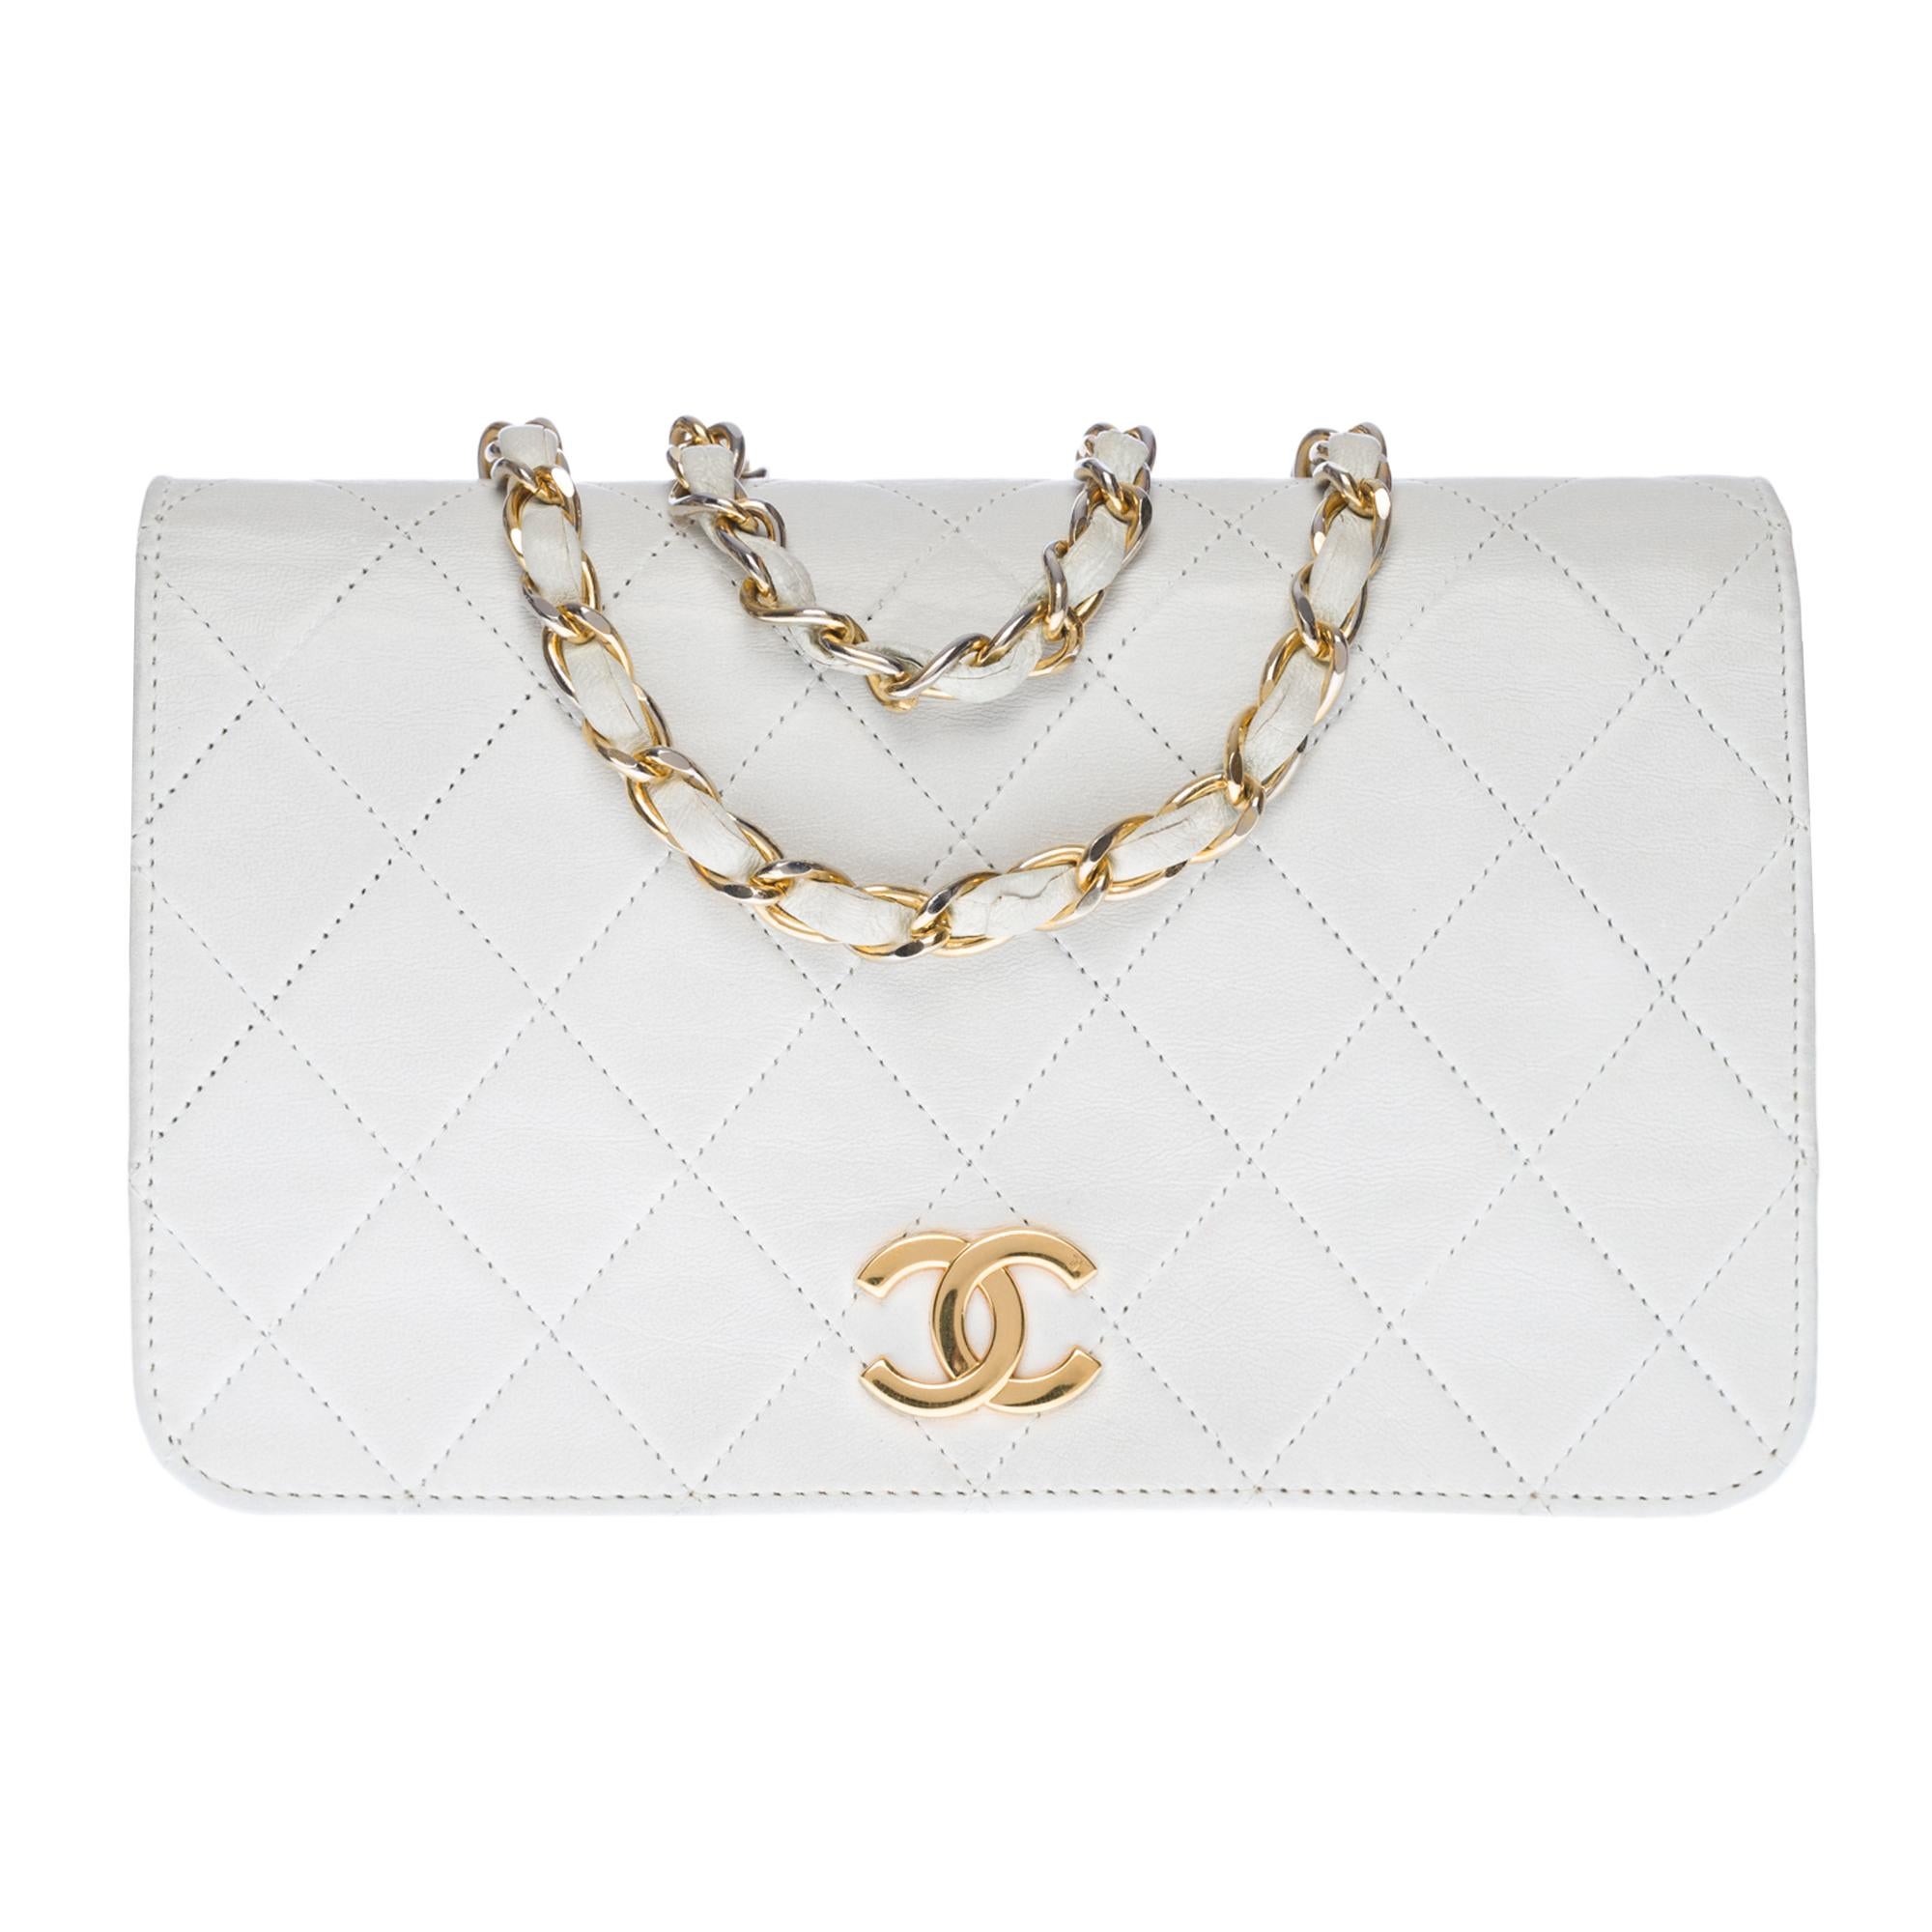 Chanel Full flap Mini shoulder bag in white quilted lambskin, GHW 6